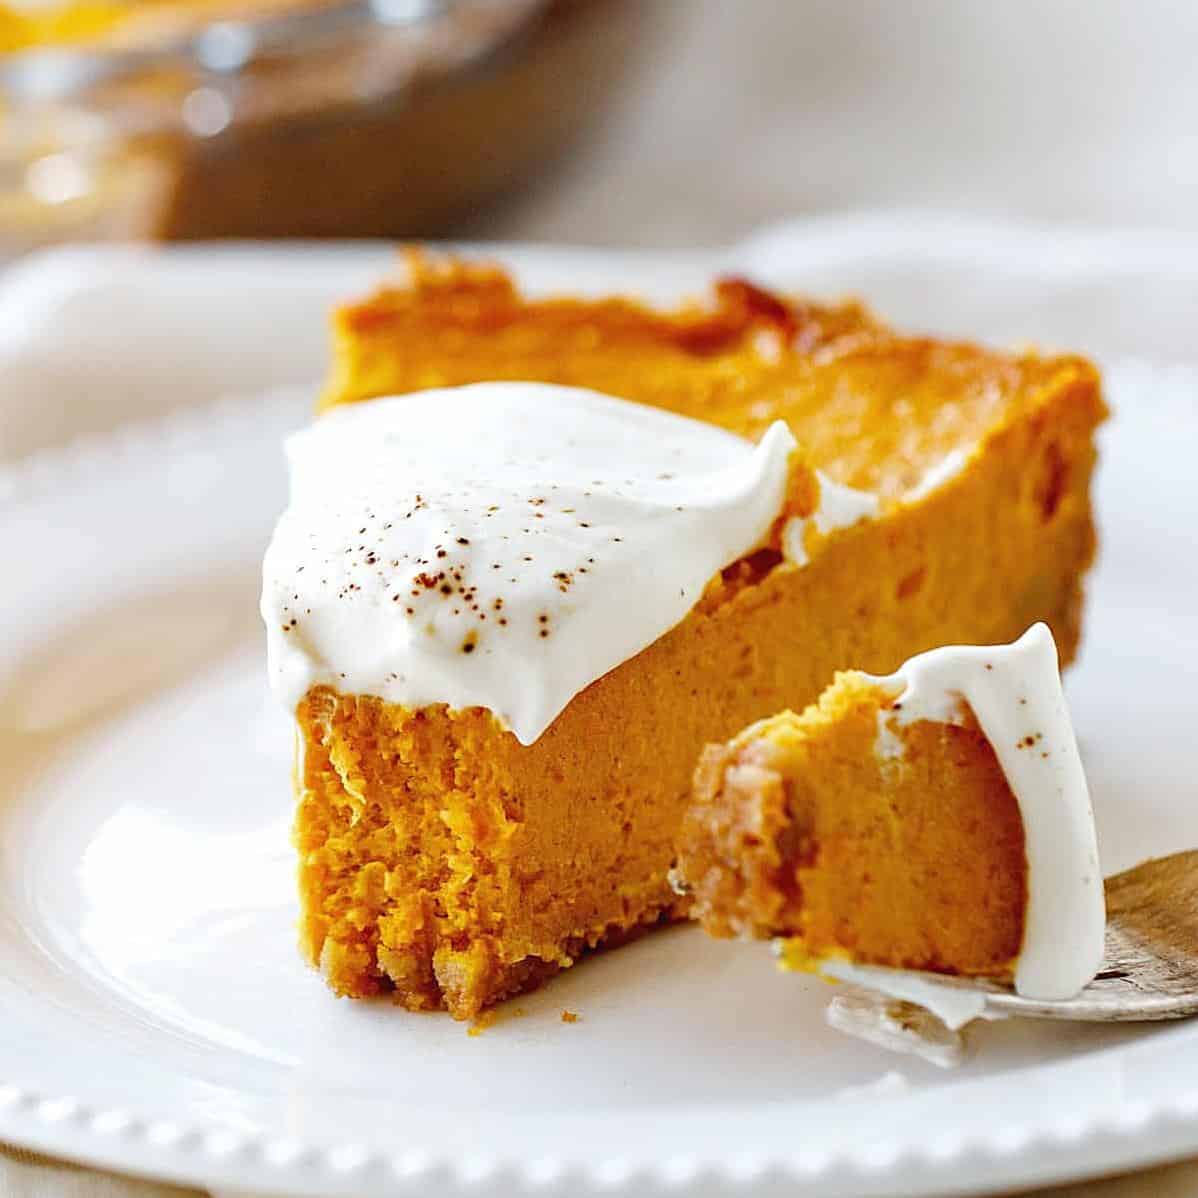  Dive into Thanksgiving with this delicious pumpkin pie recipe!